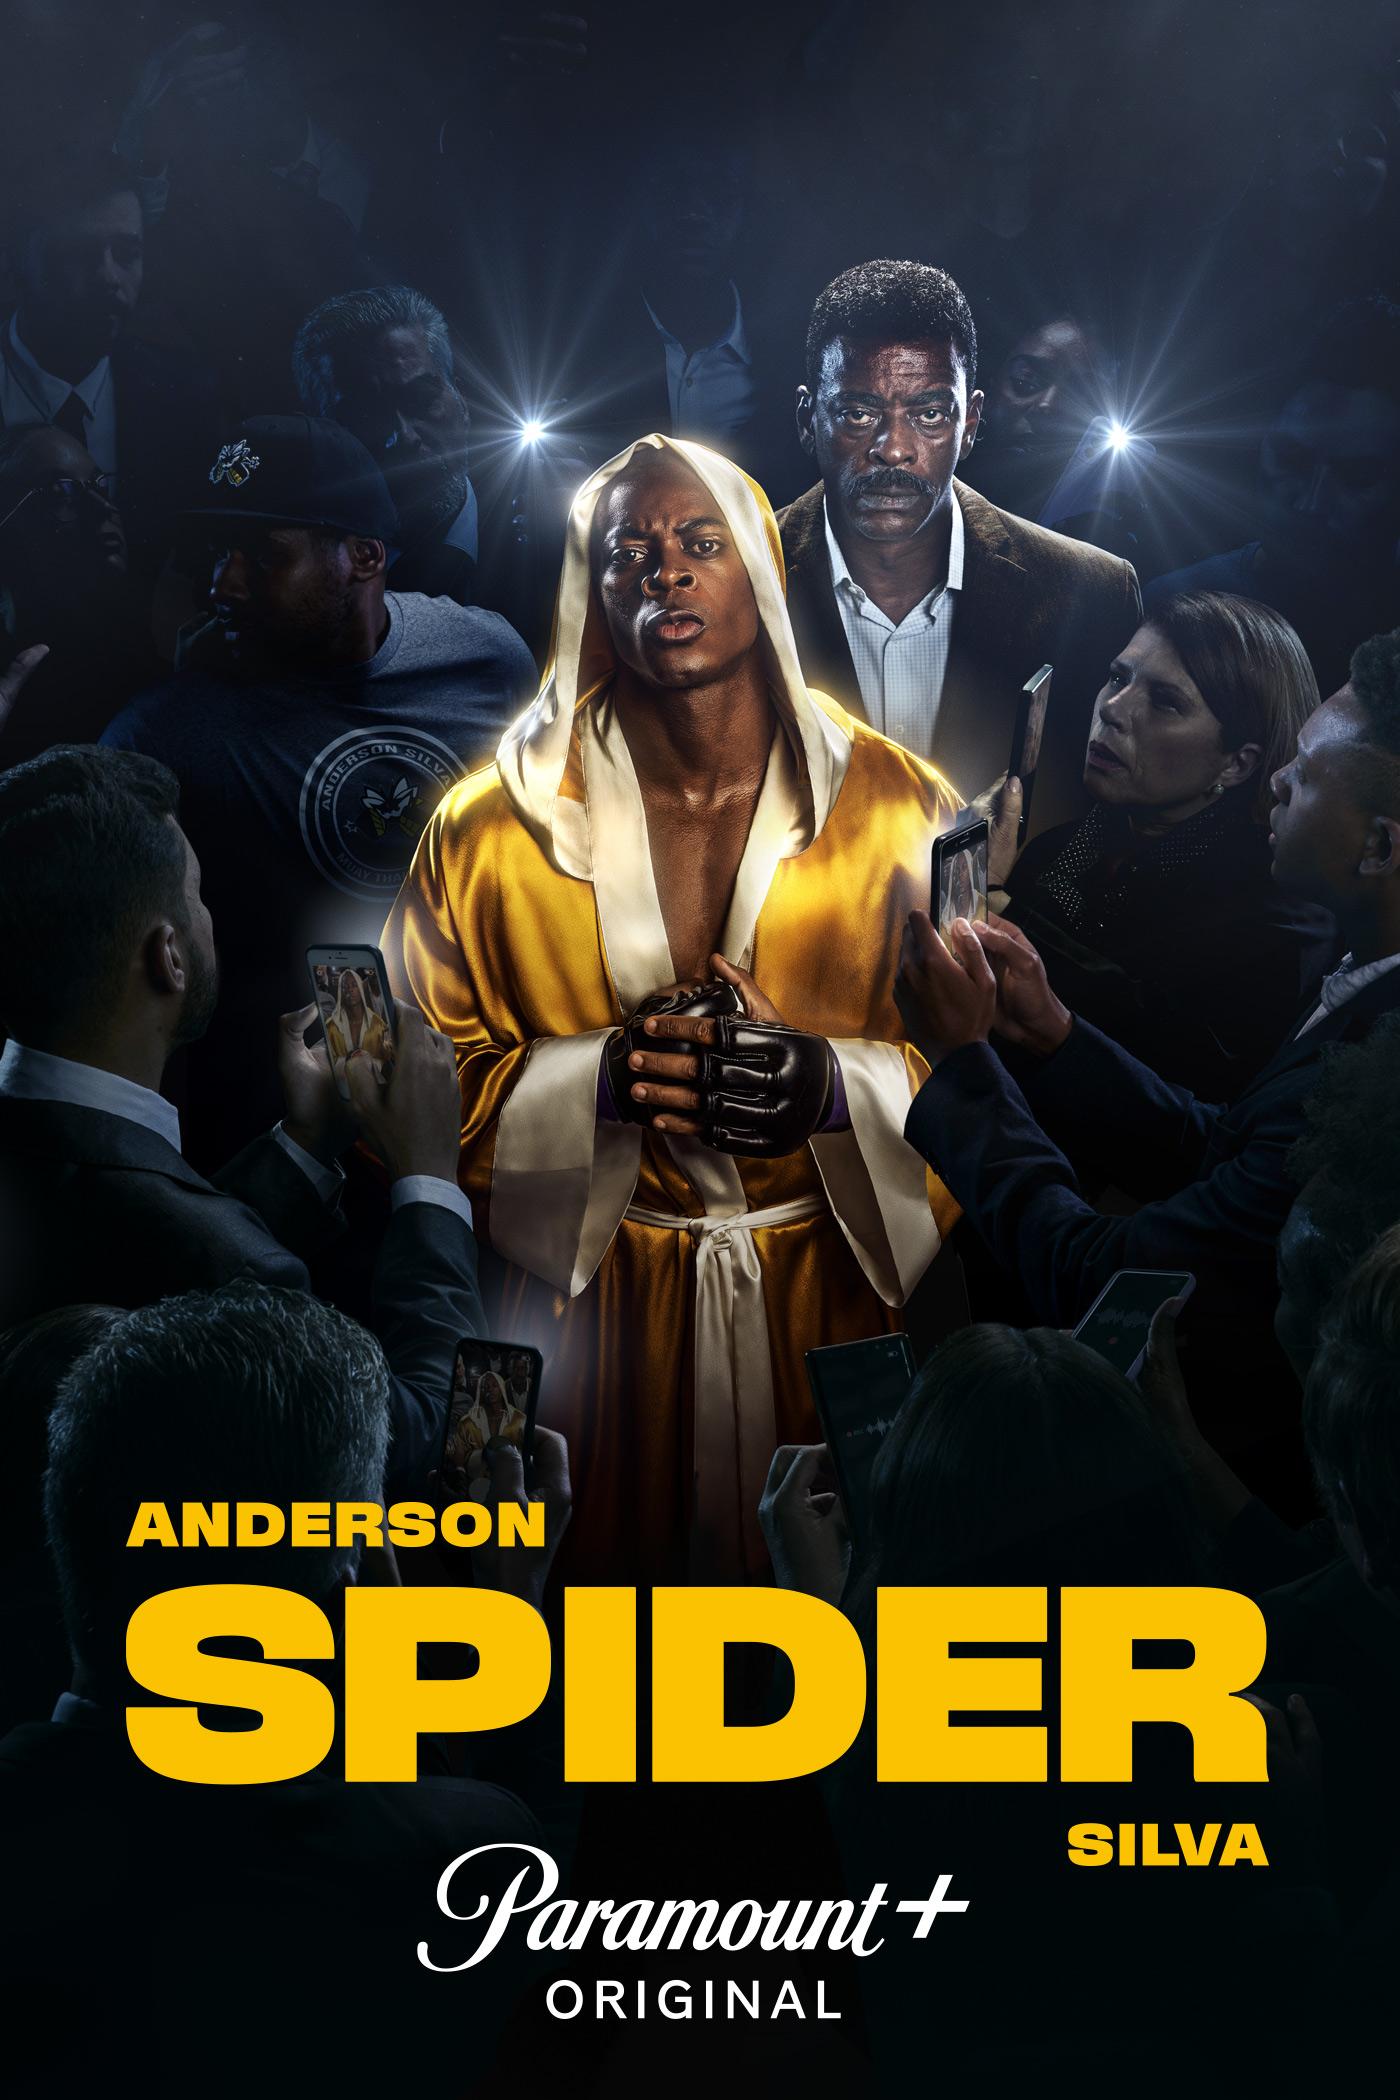 TV ratings for Anderson The Spider Silva (Anderson Spider Silva) in Turquía. Paramount+ TV series